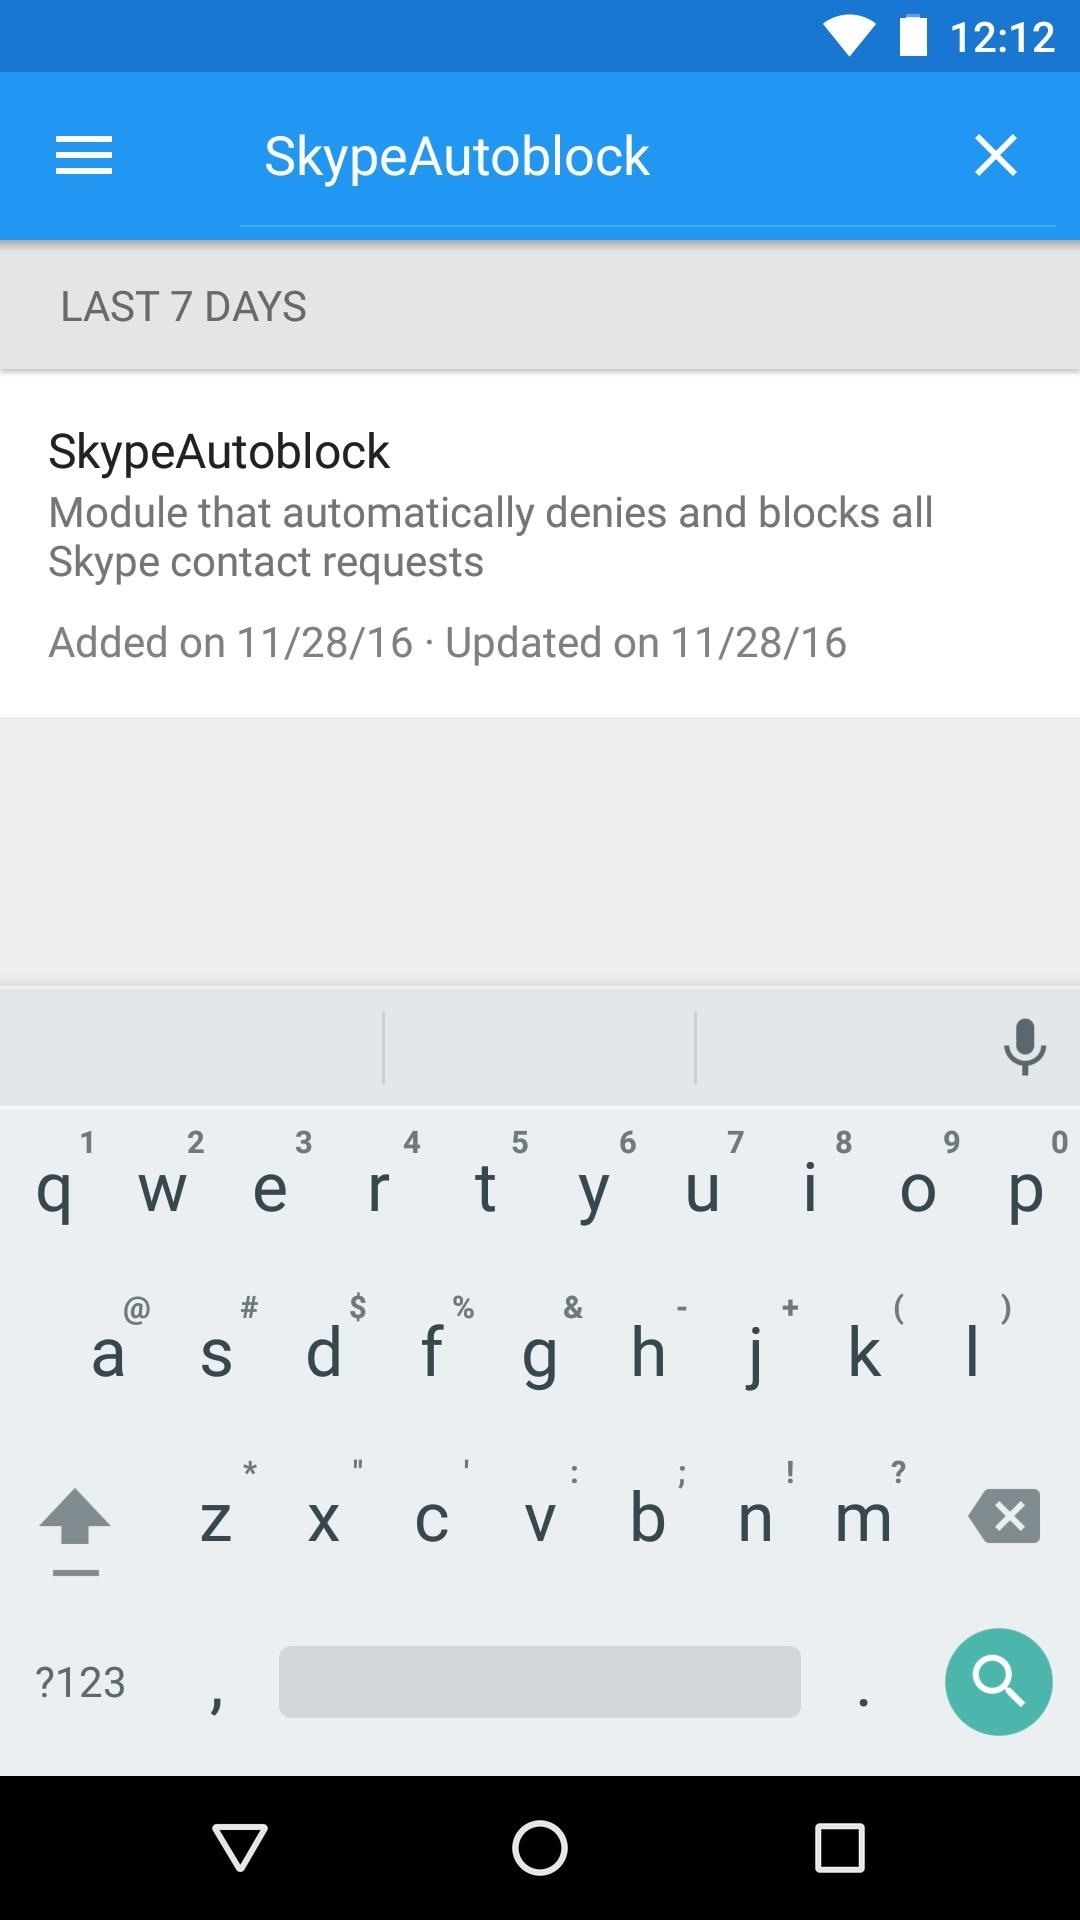 How to Block Contact Request Spam on Skype Automatically